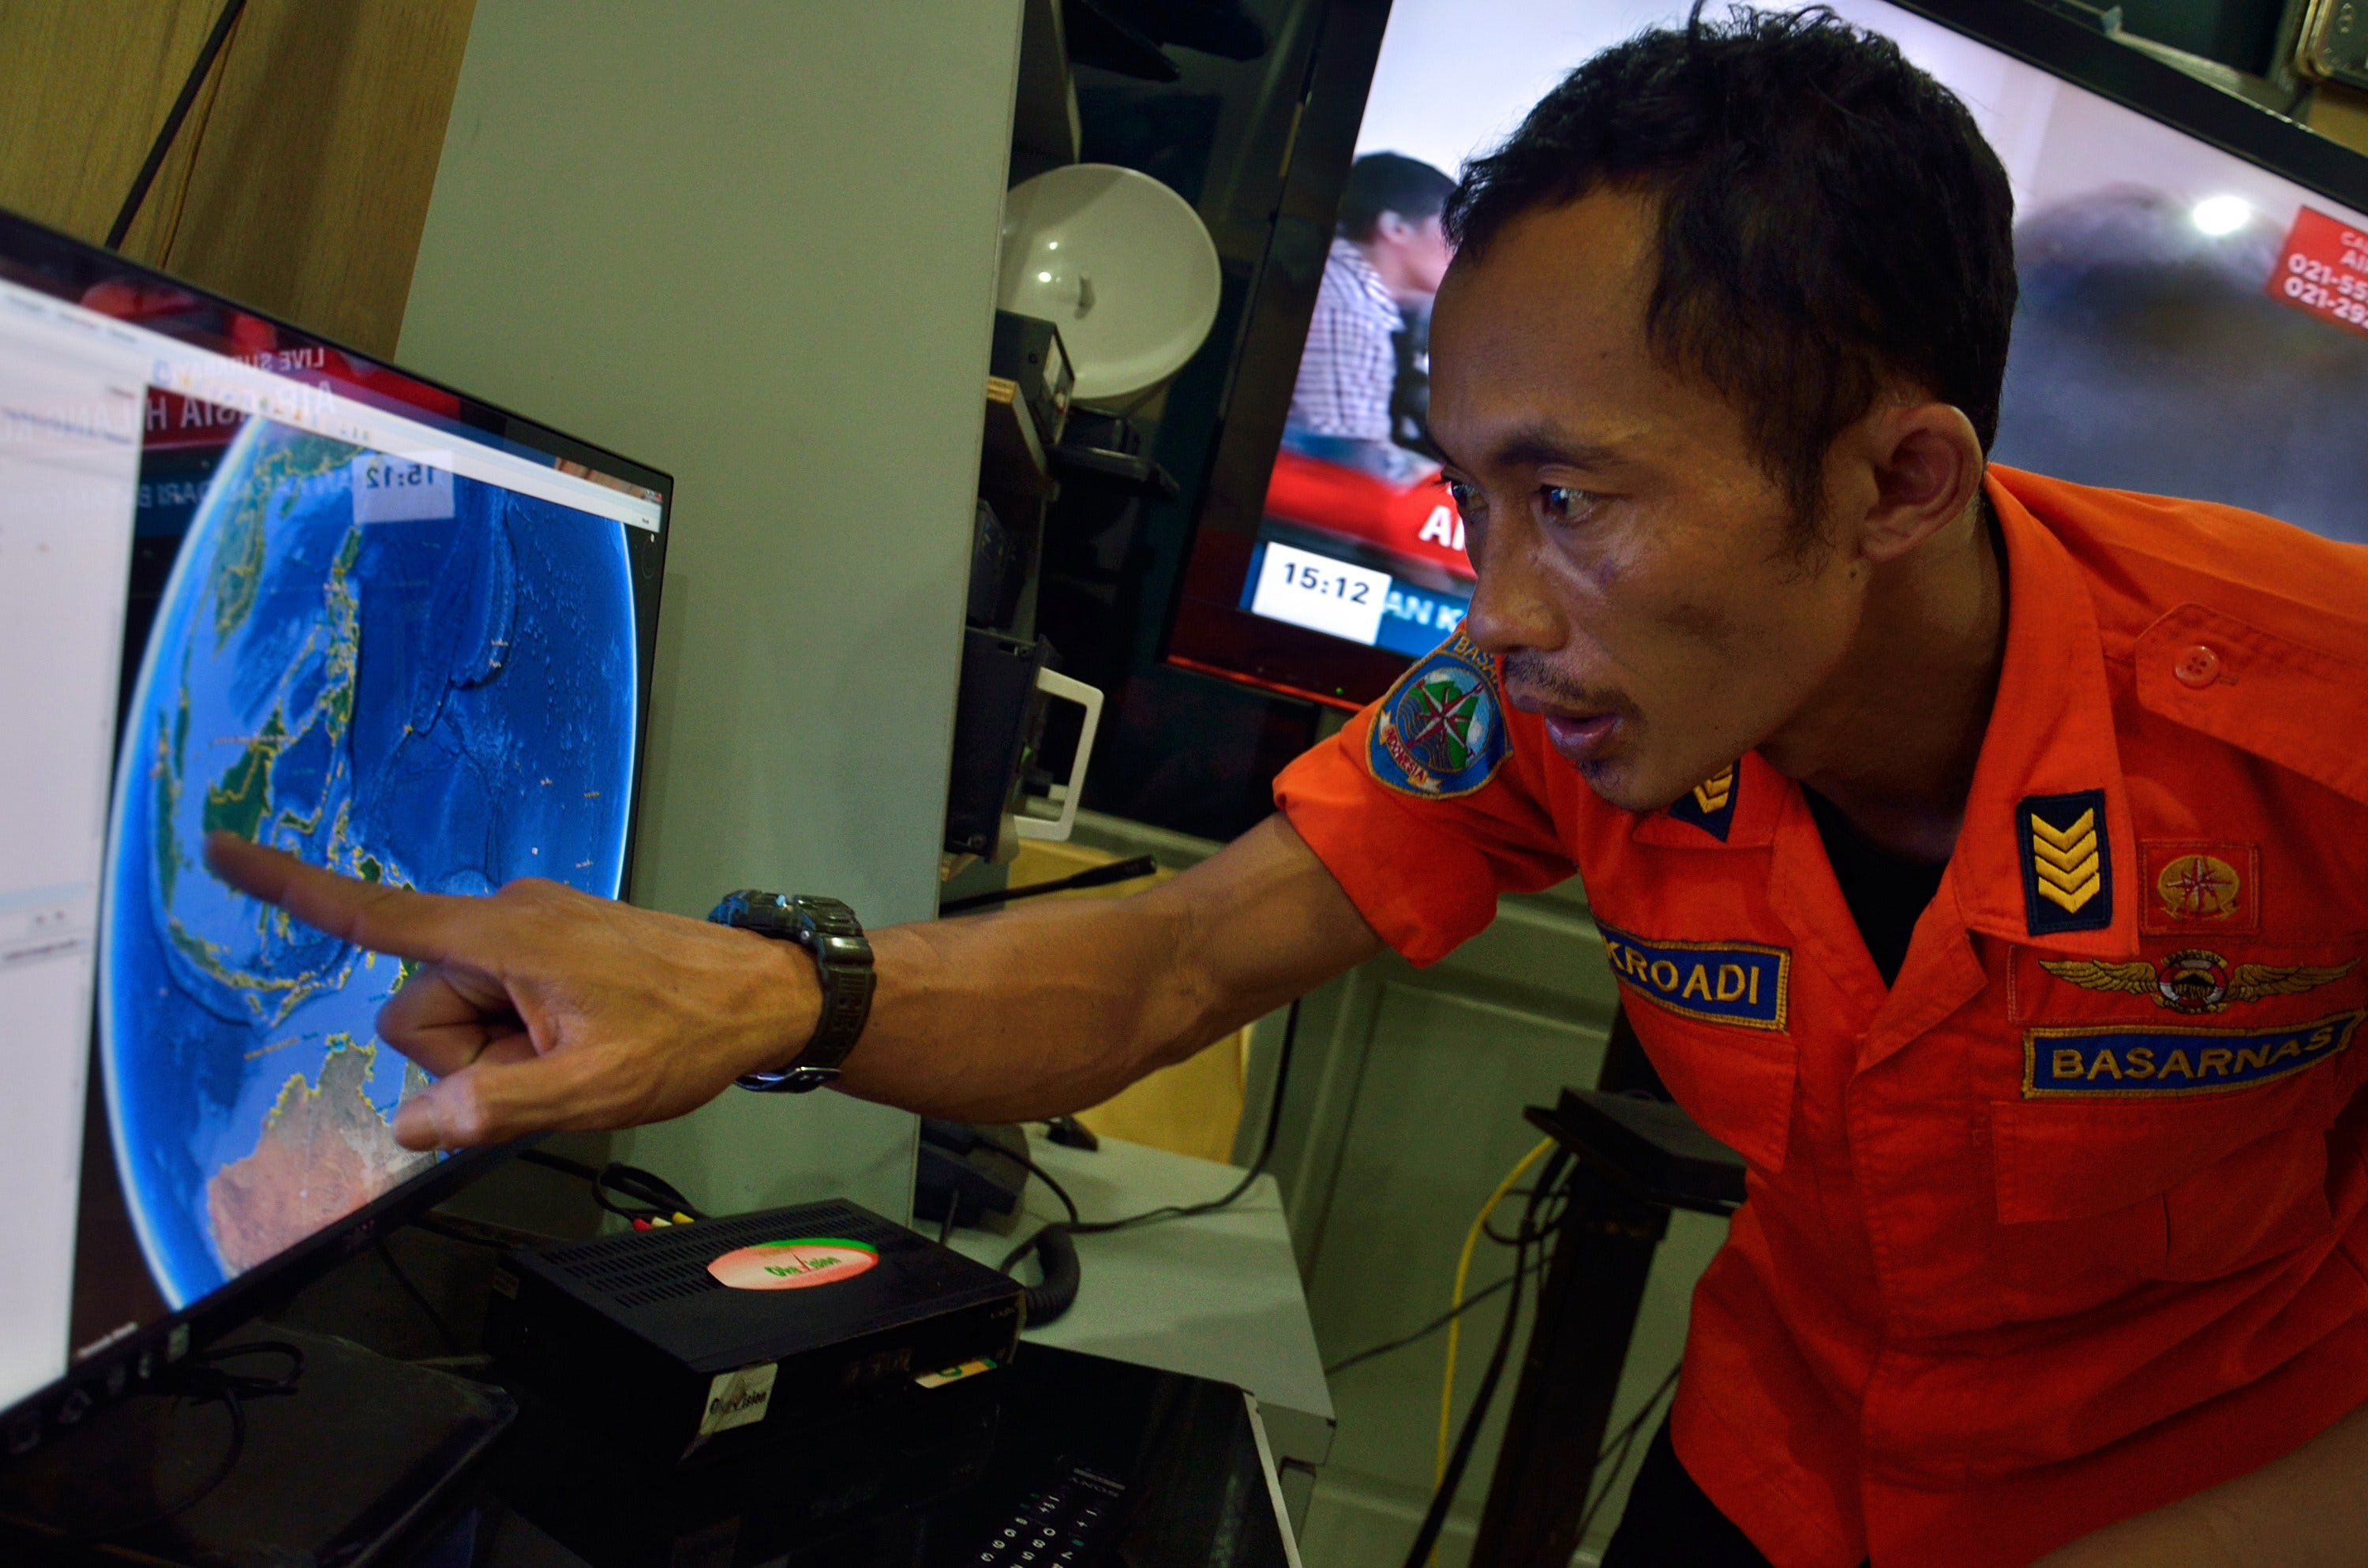 Official: Missing jet likely at bottom of the sea